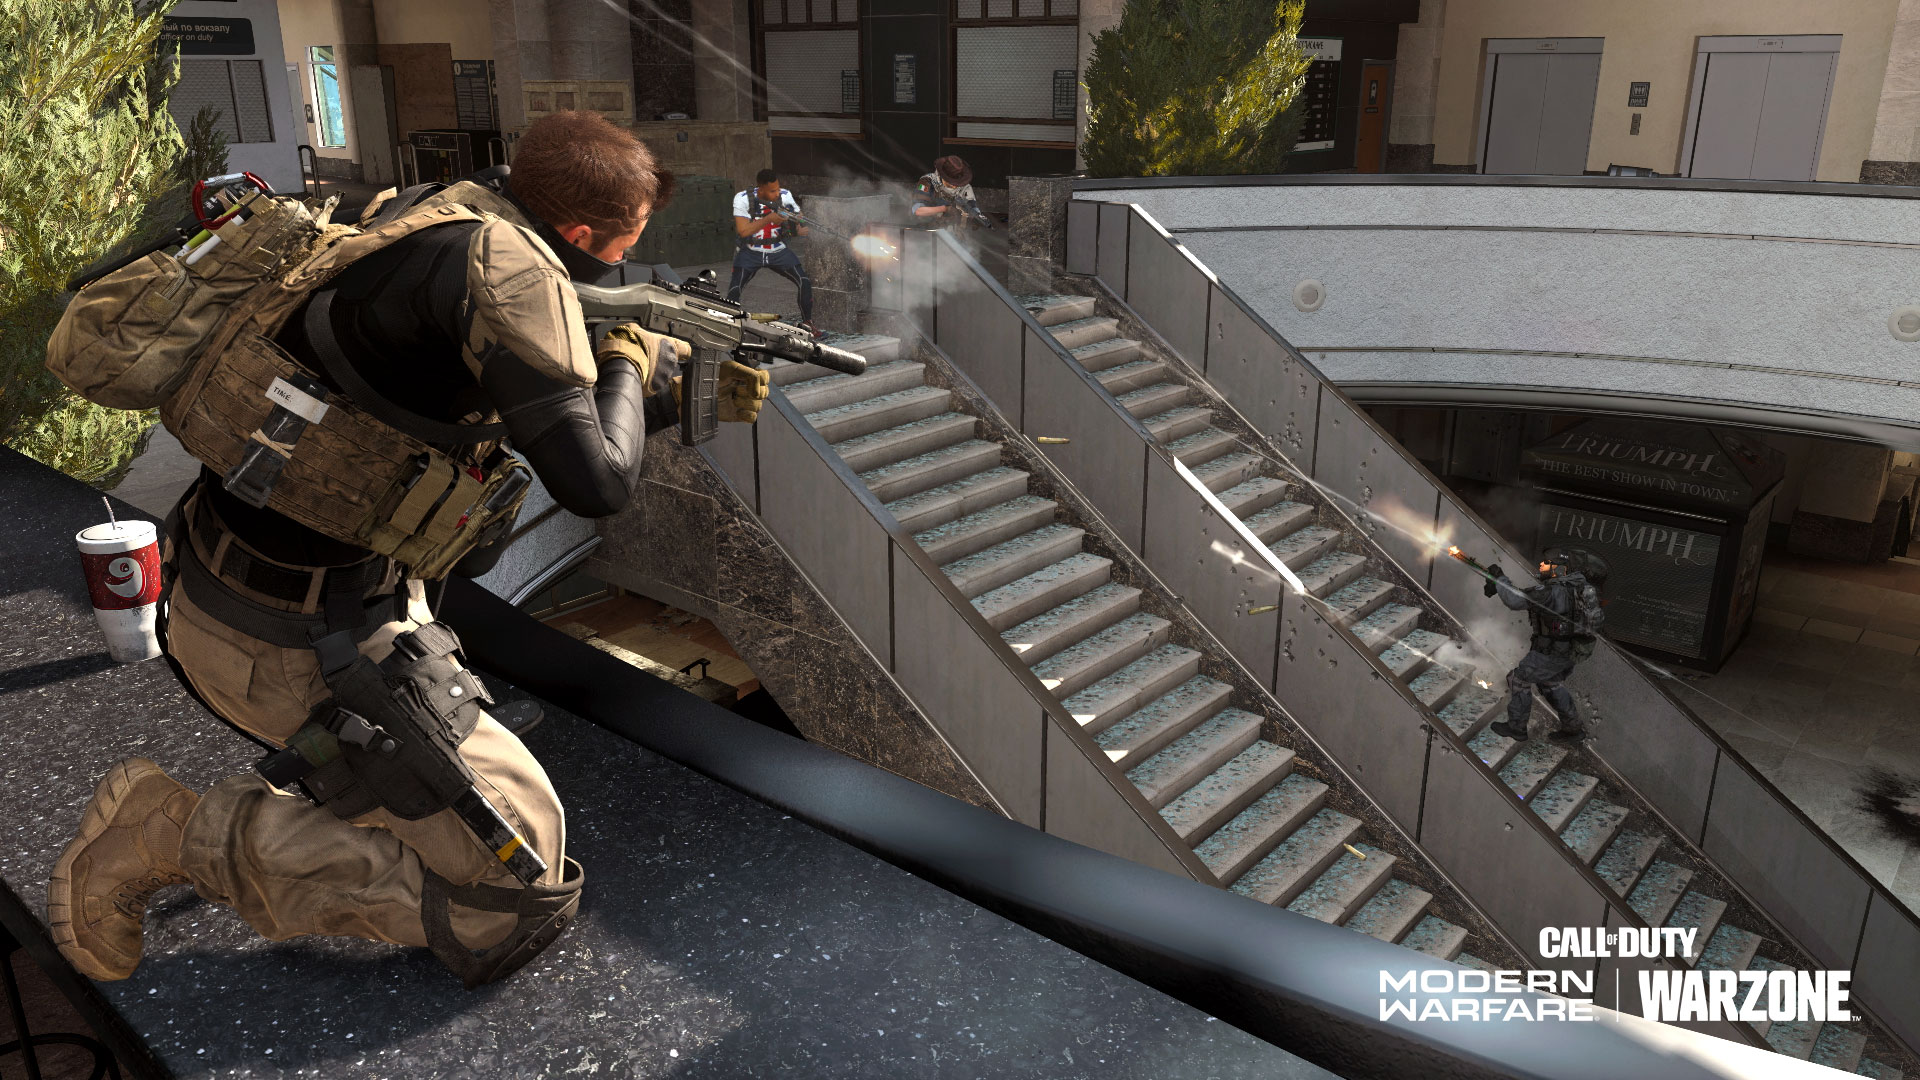 Earn Rewards in Season Five of Modern Warfare® to equip in Multiplayer,  Special Ops, and Warzone™ by Watching Twitch